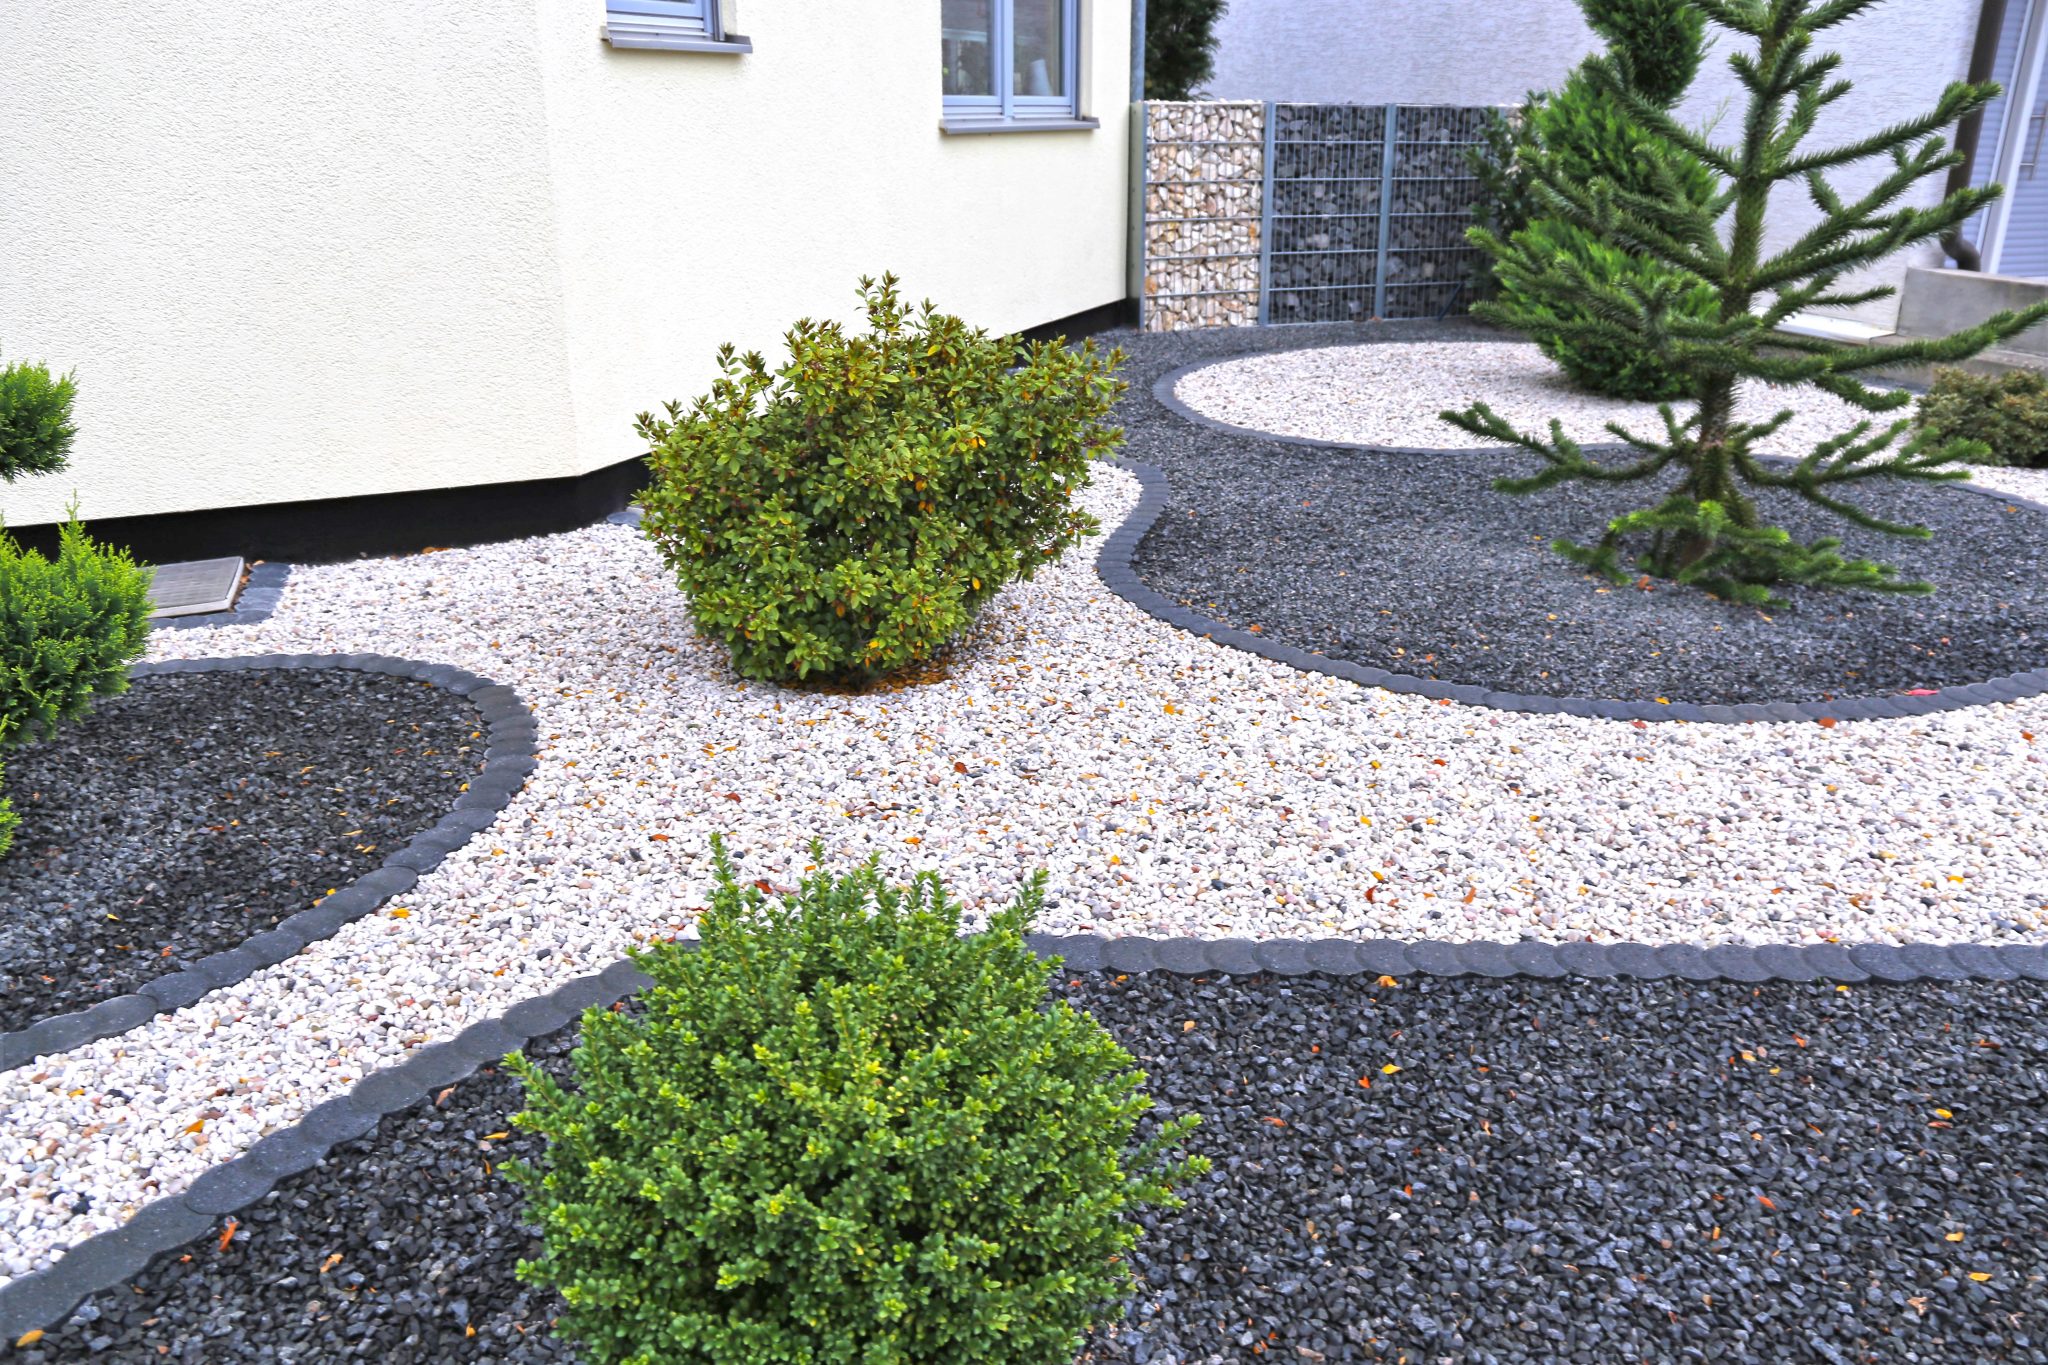 Landscaping With Decorative Rock, Gravel Landscaping Pics